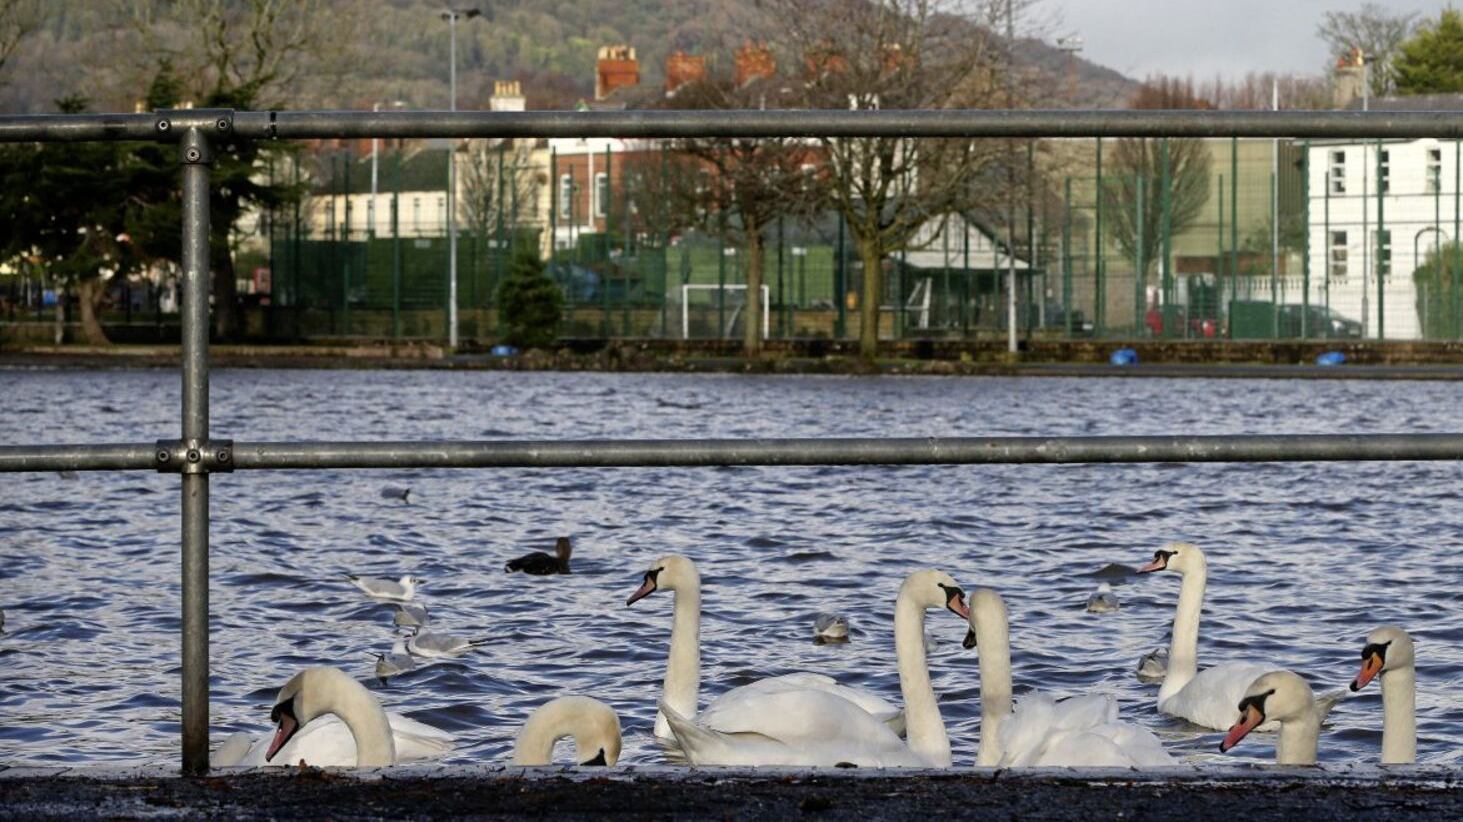 Belfast City Council temporarily closed the Waterworks Park in Belfast last week due to an outbreak of avian flu. Picture Mal McCann 